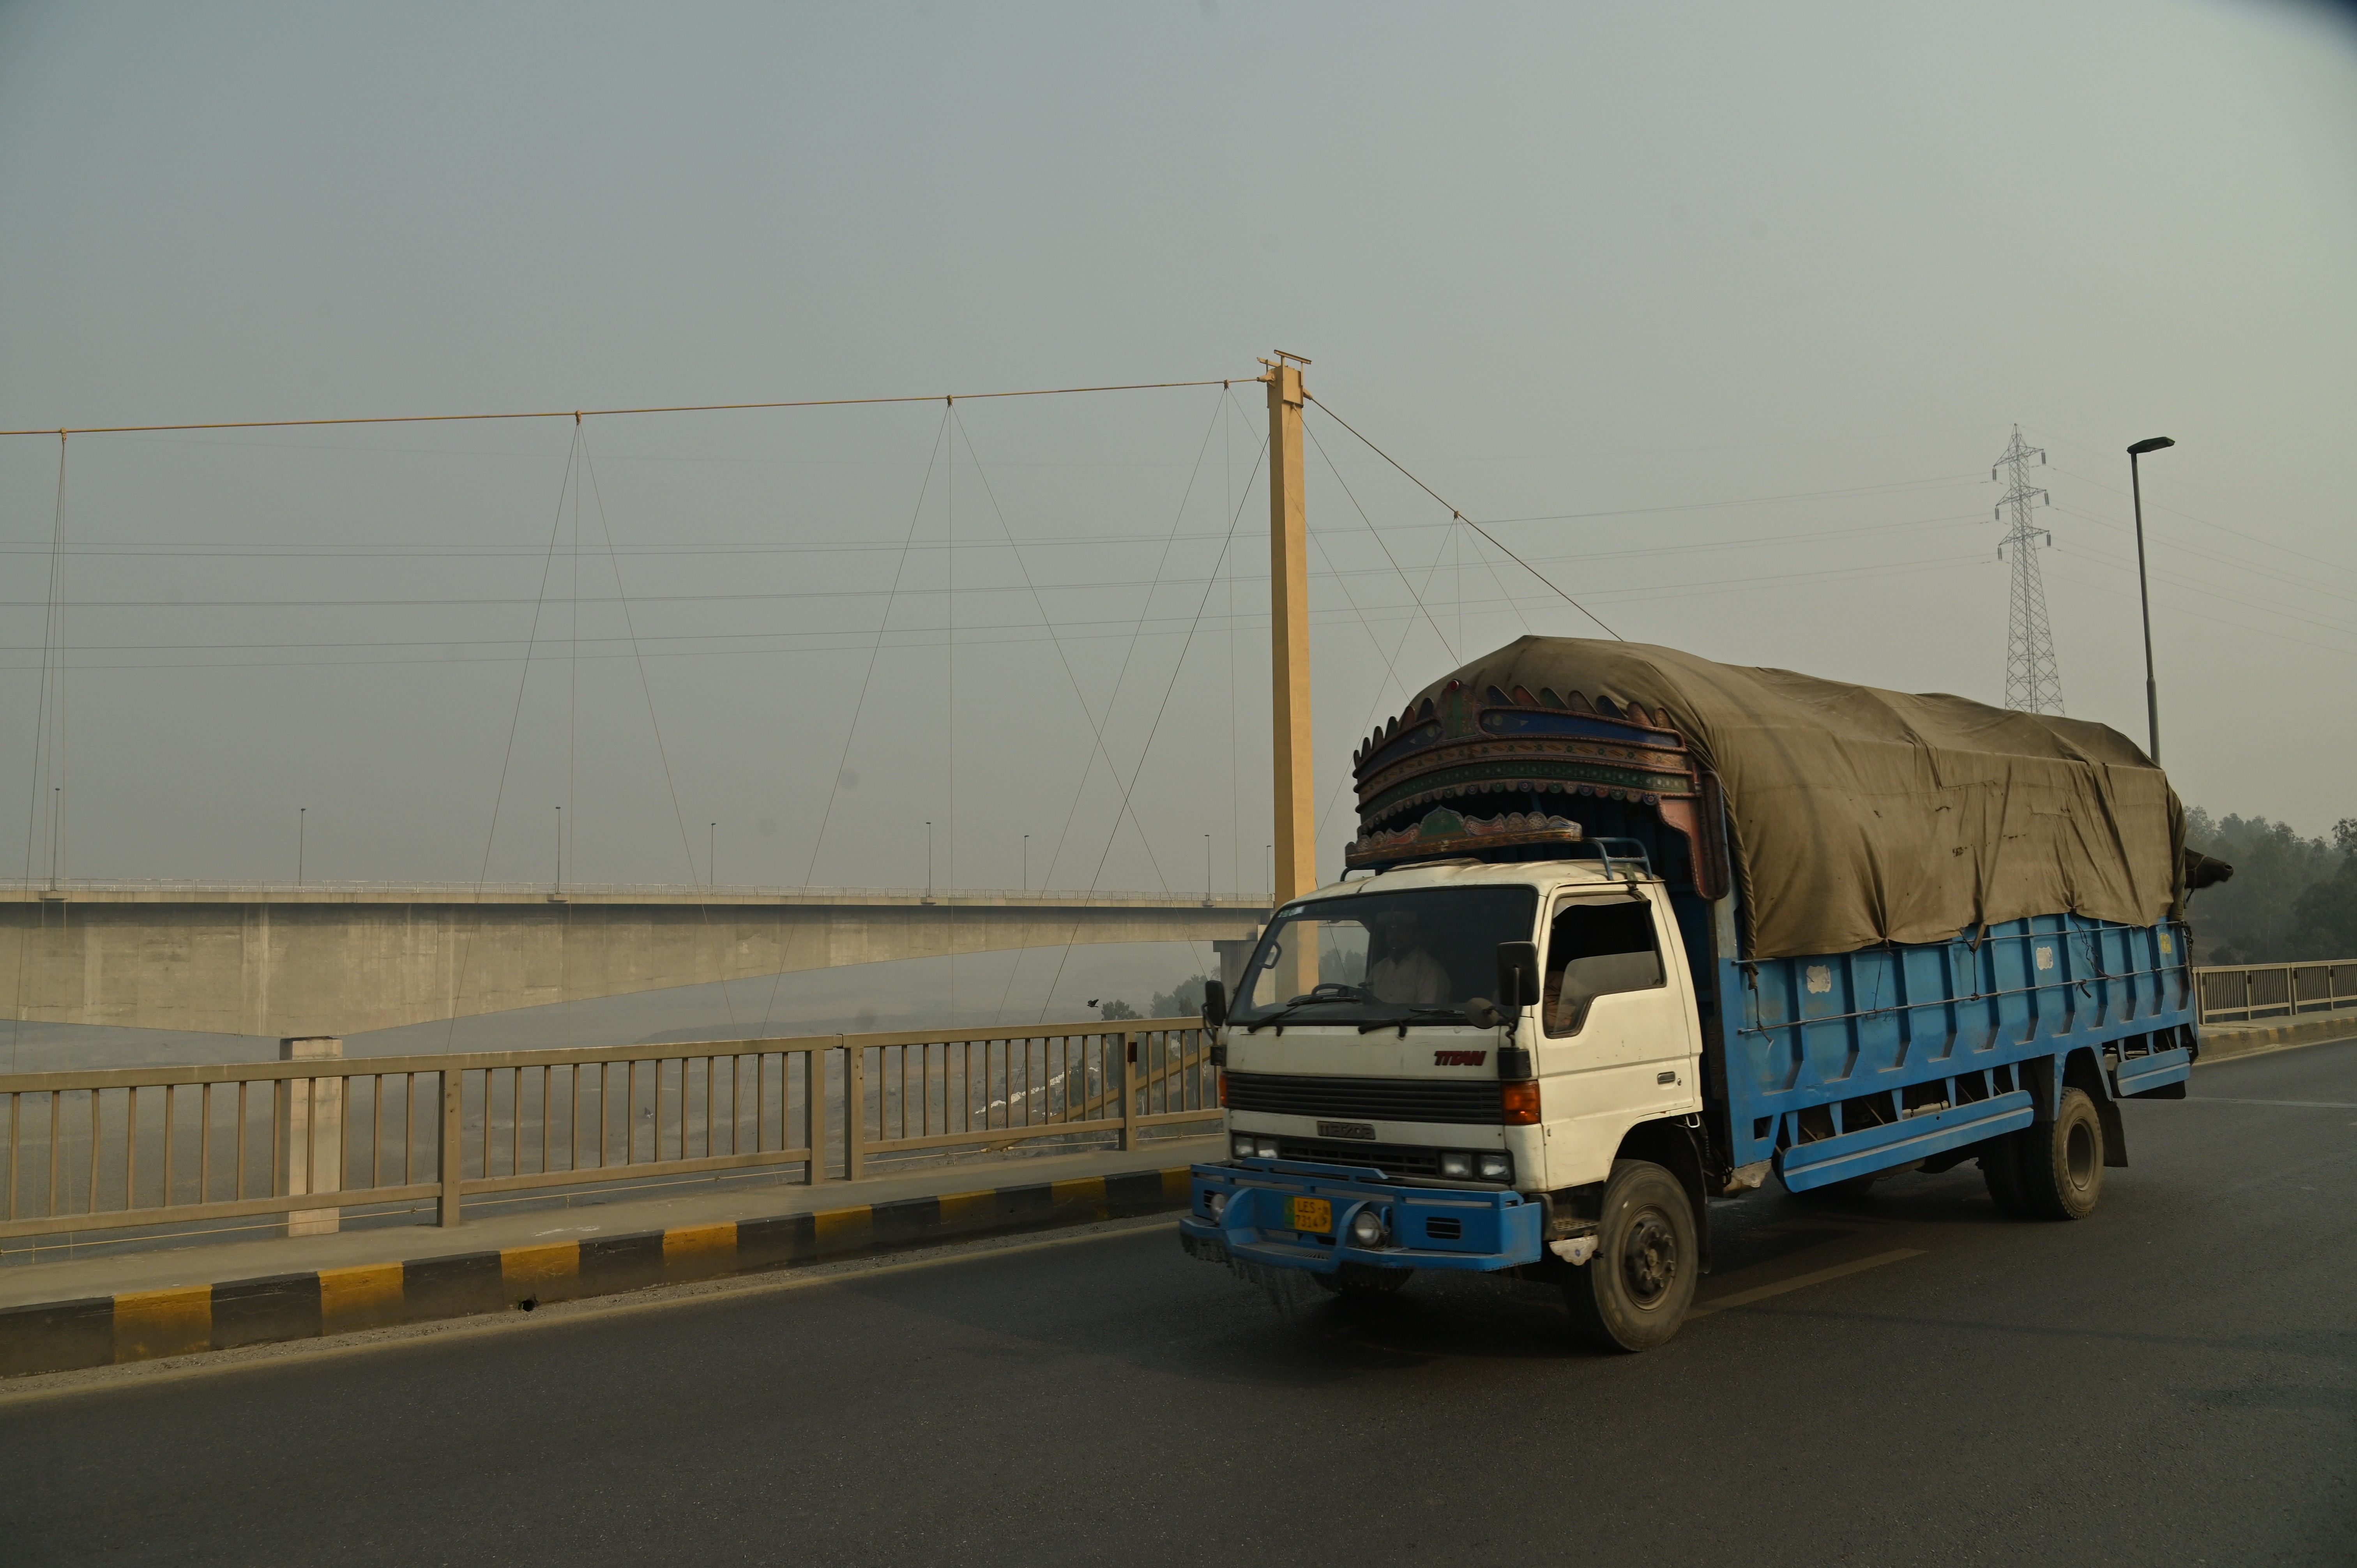 A truck passing by the bridge